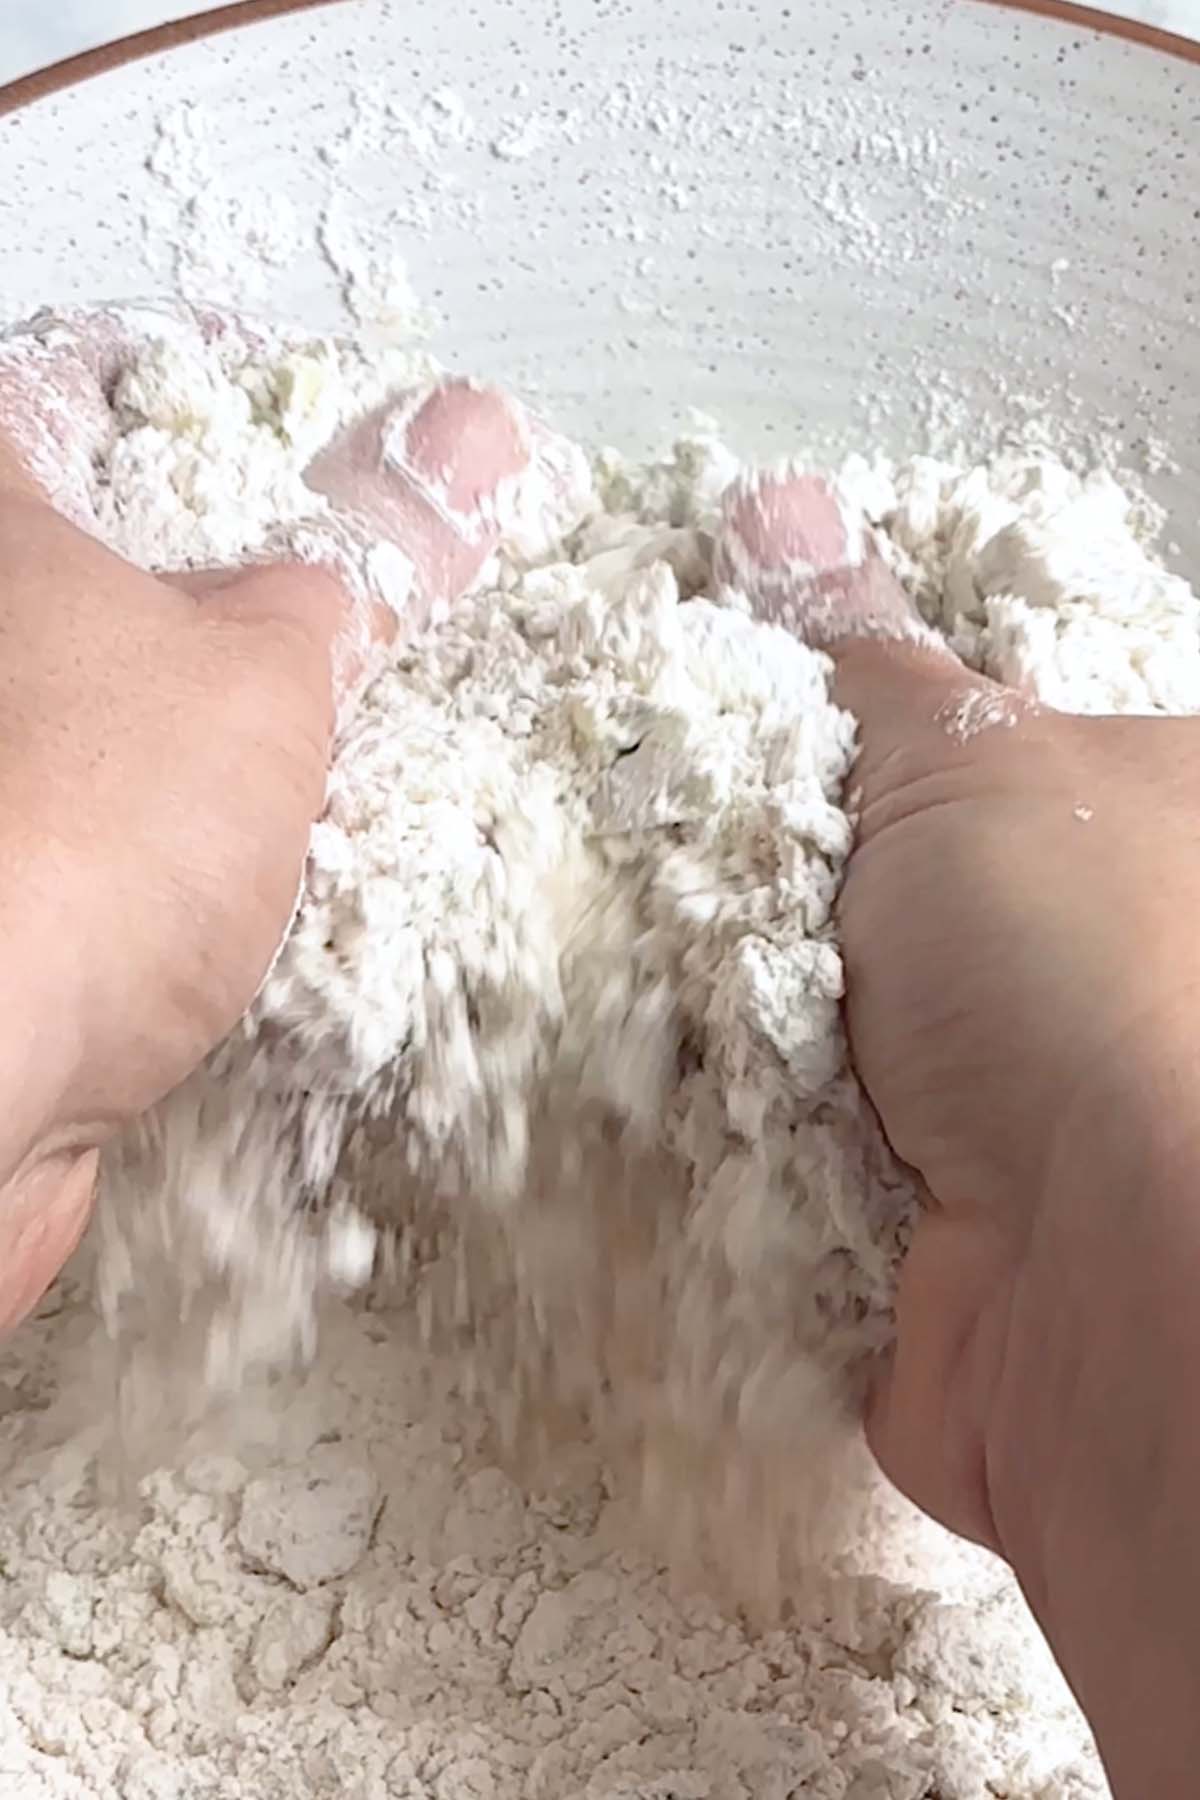 Flour and avocado is combined by hand.